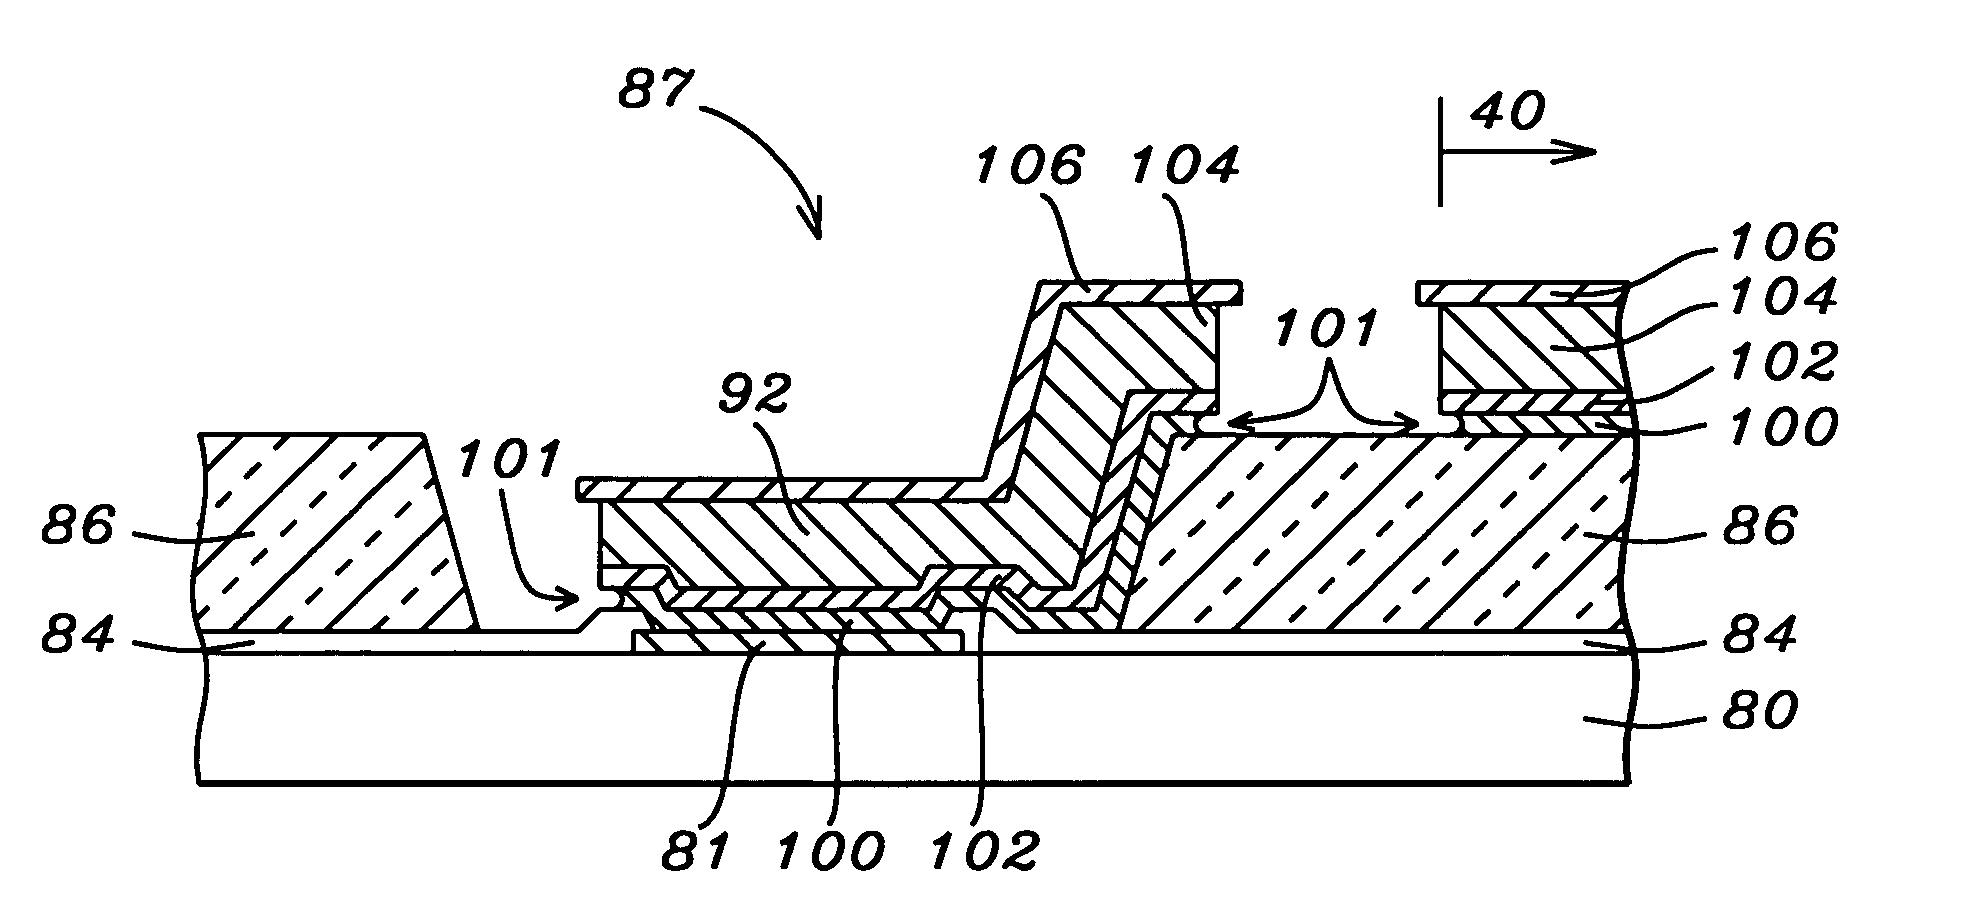 Post passivation interconnection process and structures